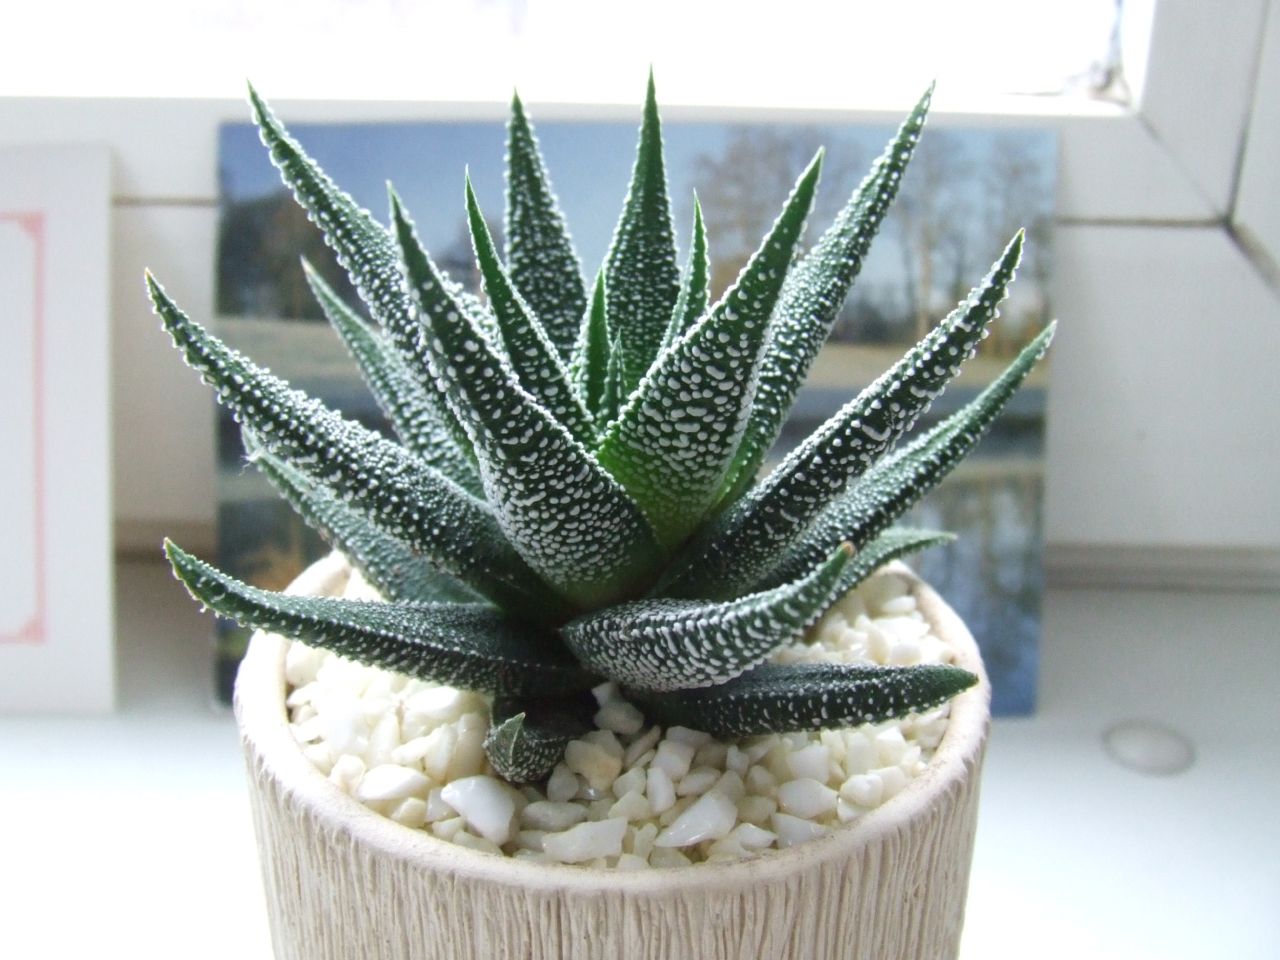 Aloe is poisonous for pets